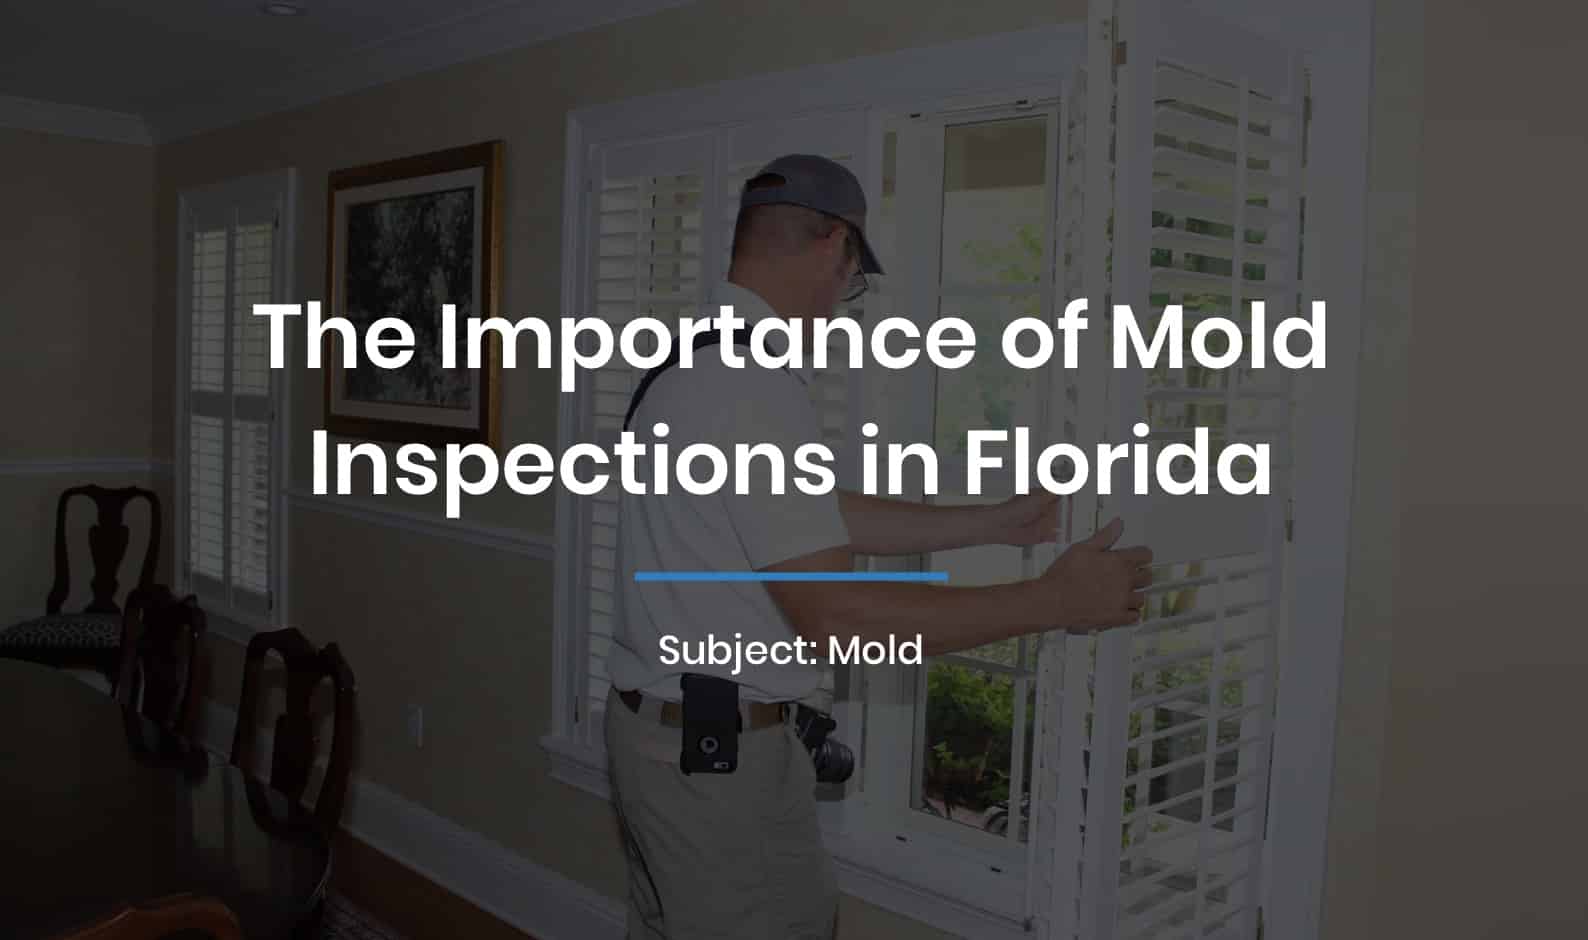 The Importance of Mold Inspections in Florida